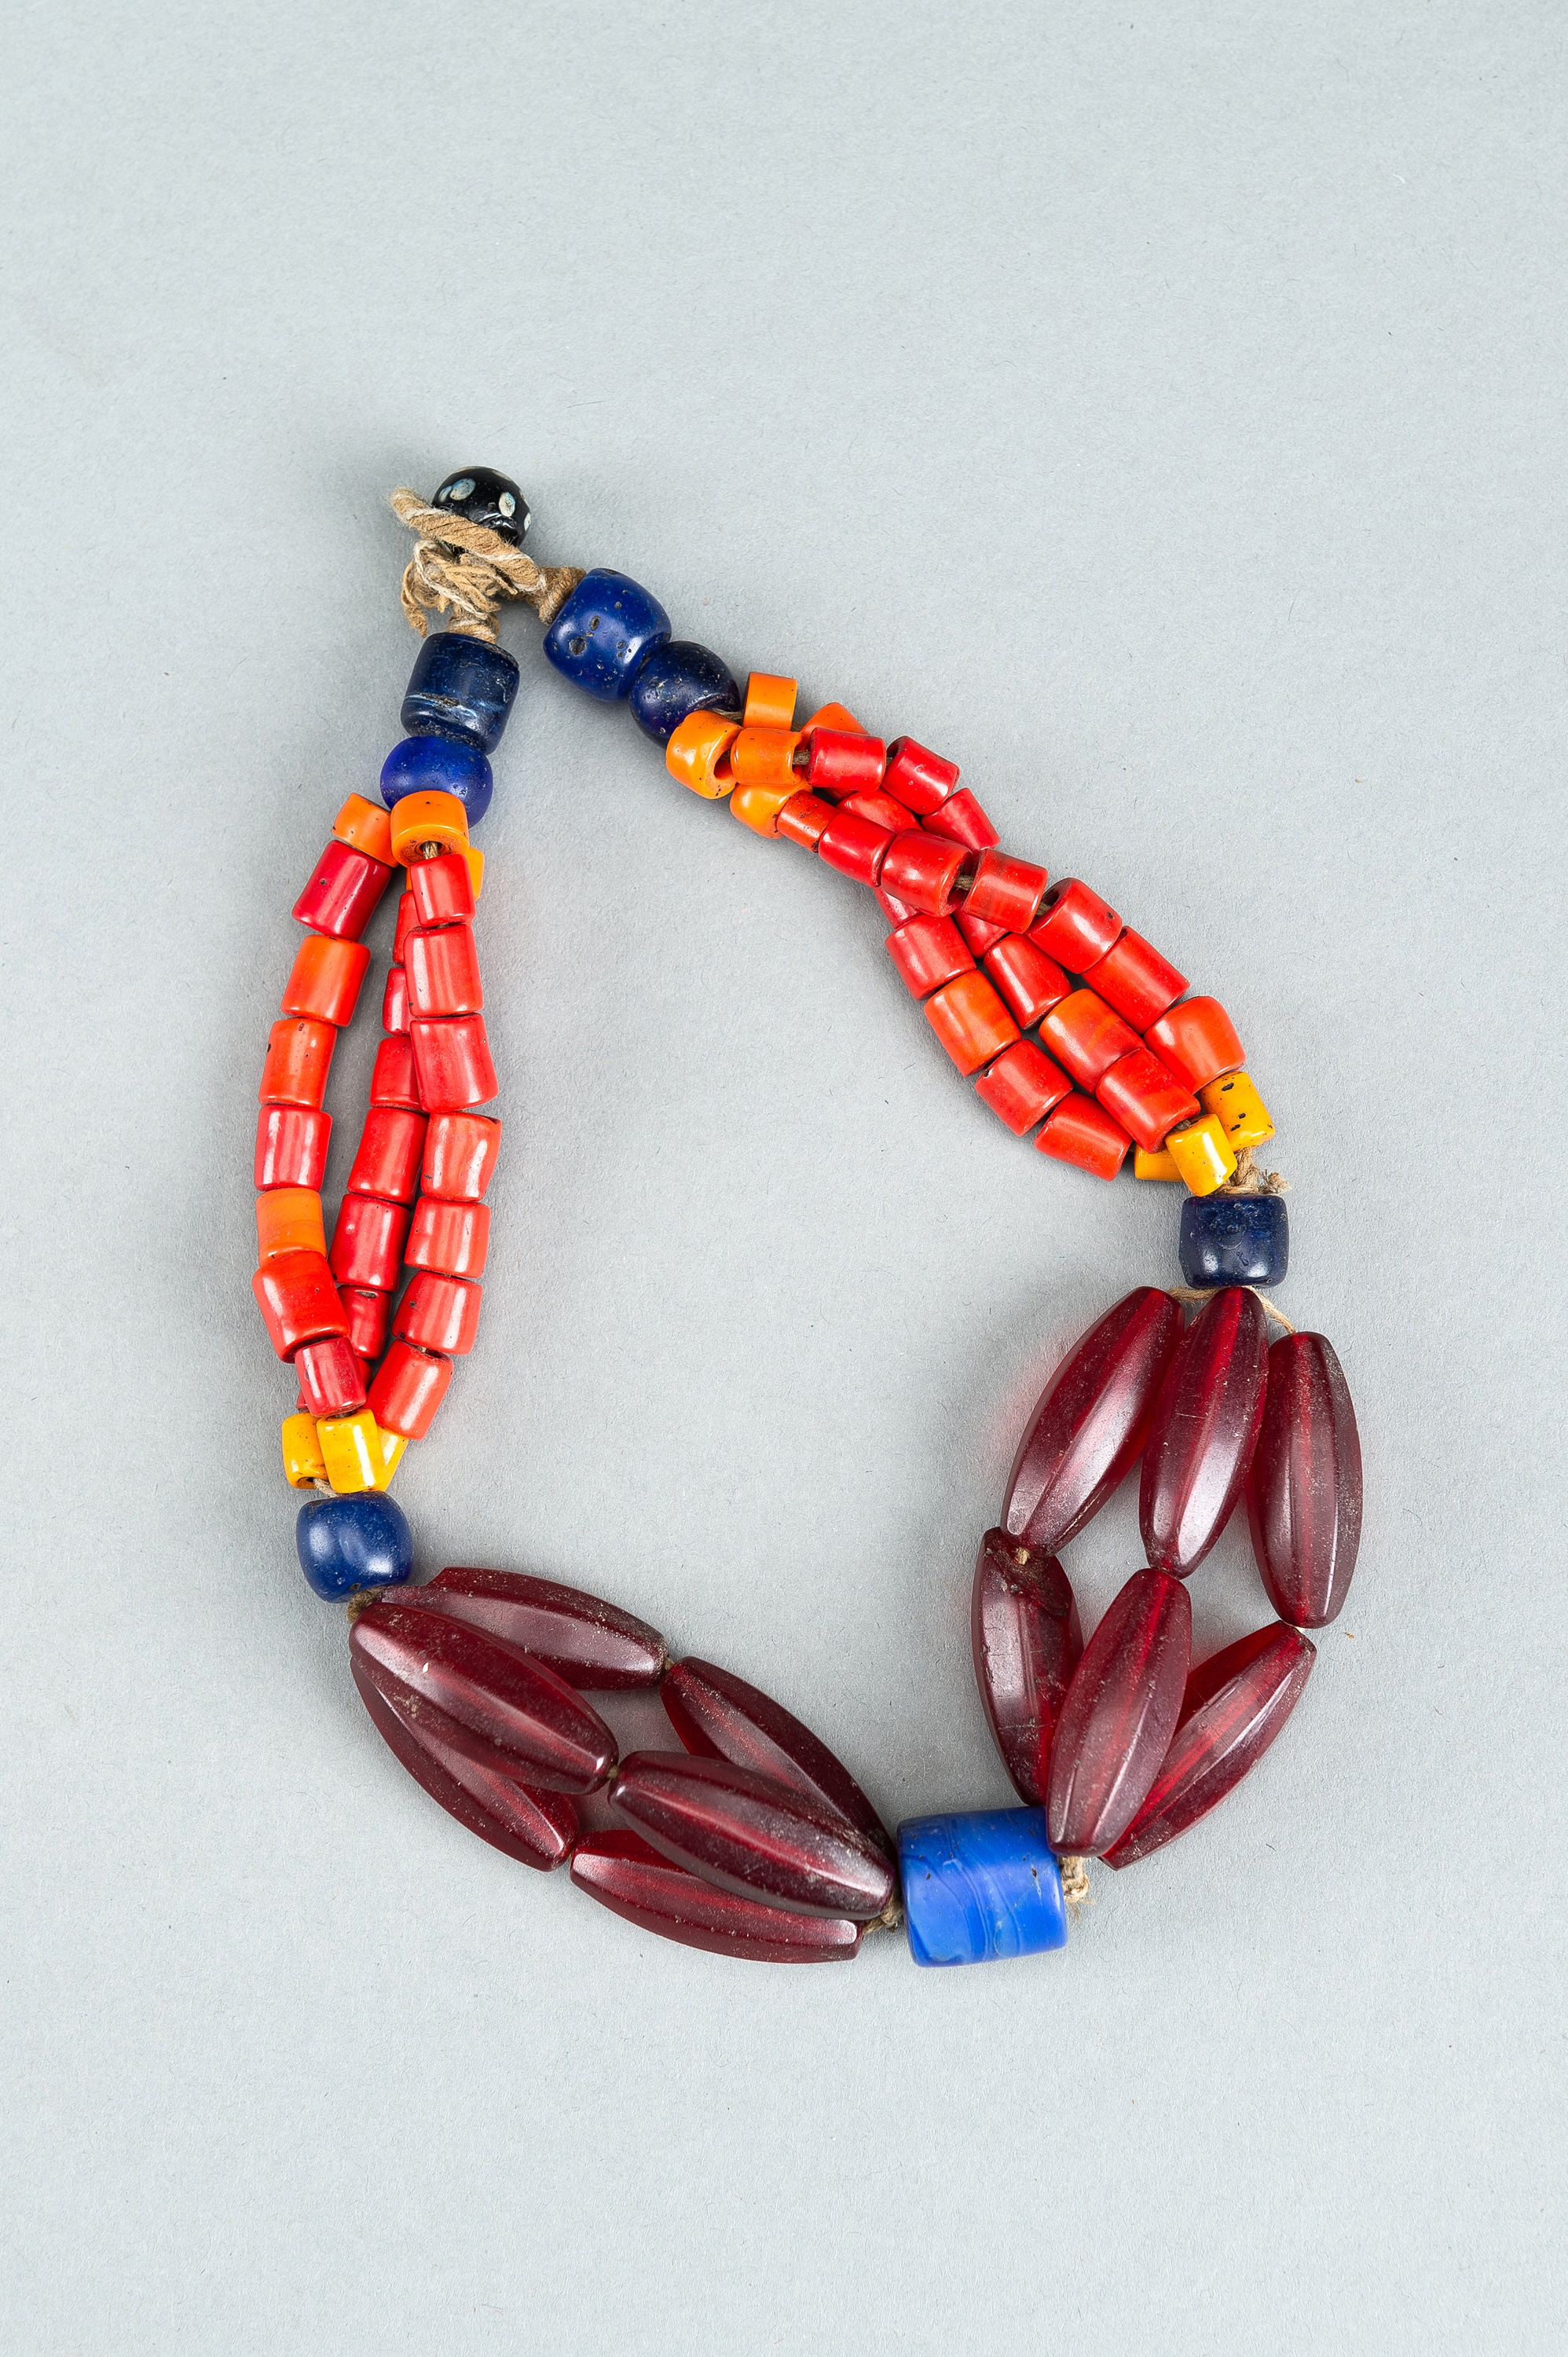 A NAGALAND MULTI-COLORED GLASS NECKLACE, c. 1900s - Image 7 of 9